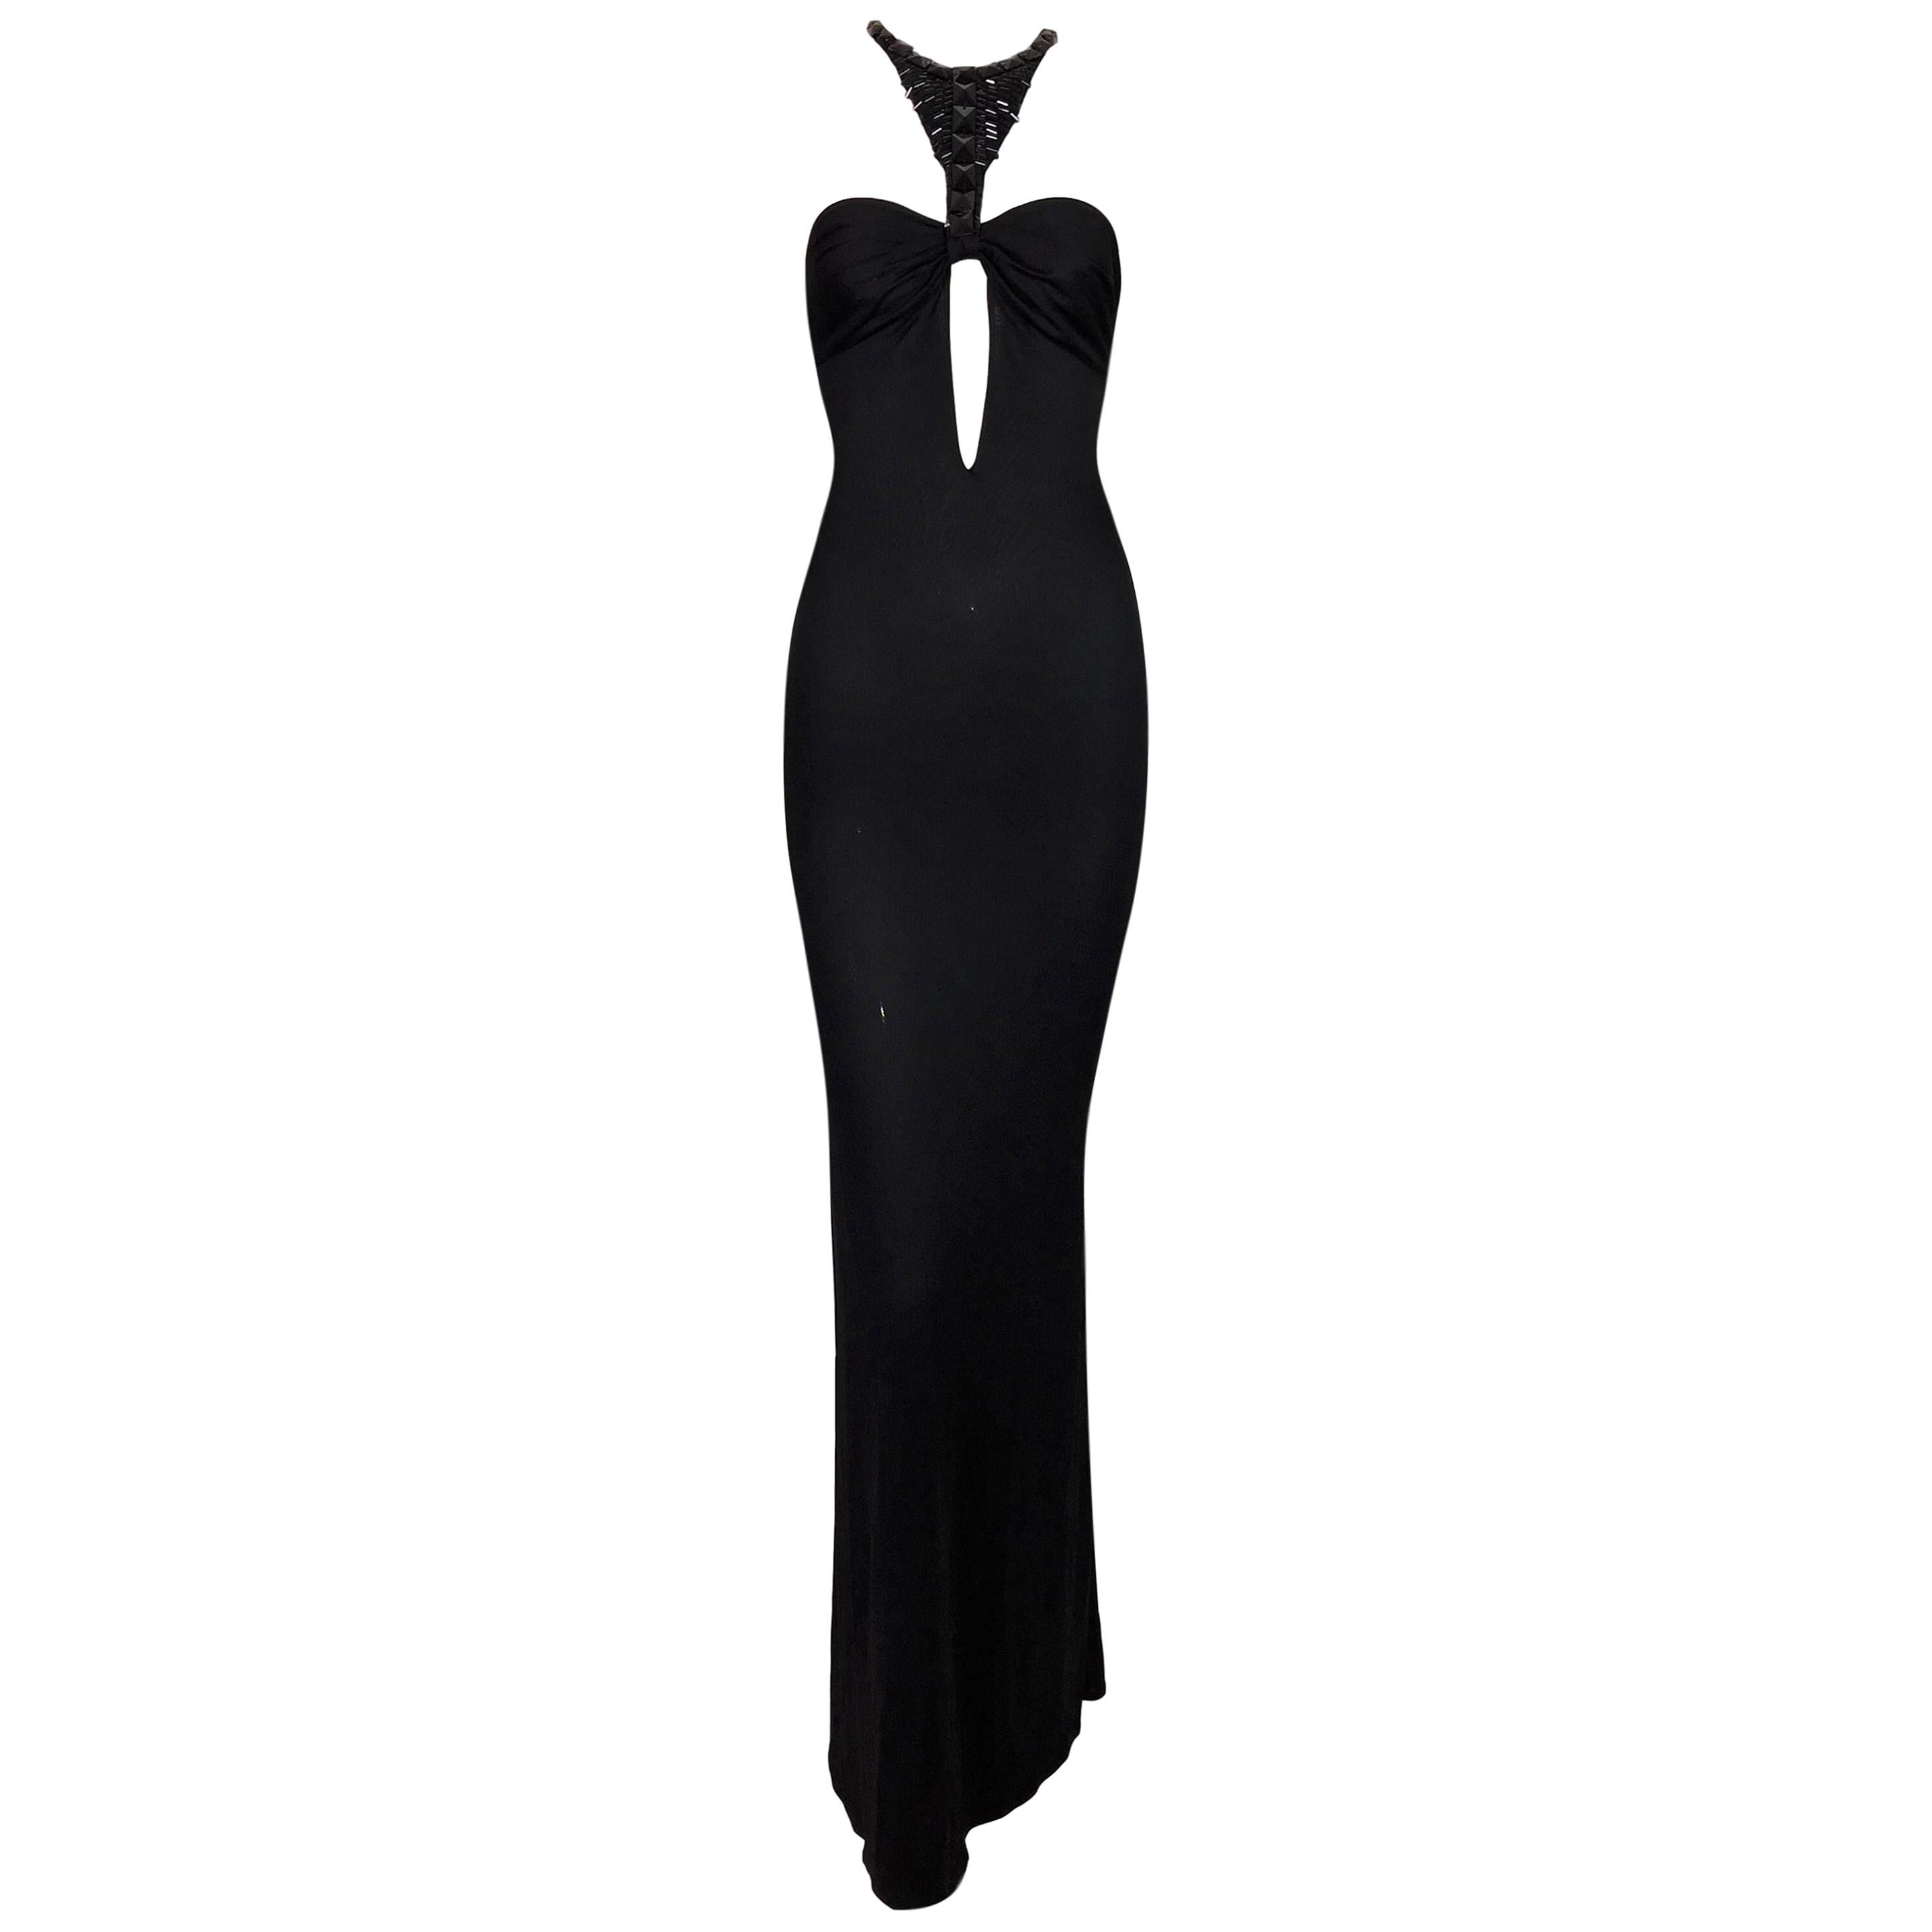 F/W 2004 Gucci Tom Ford Black Slinky Plunging Cut-Out Beaded Gown Dress